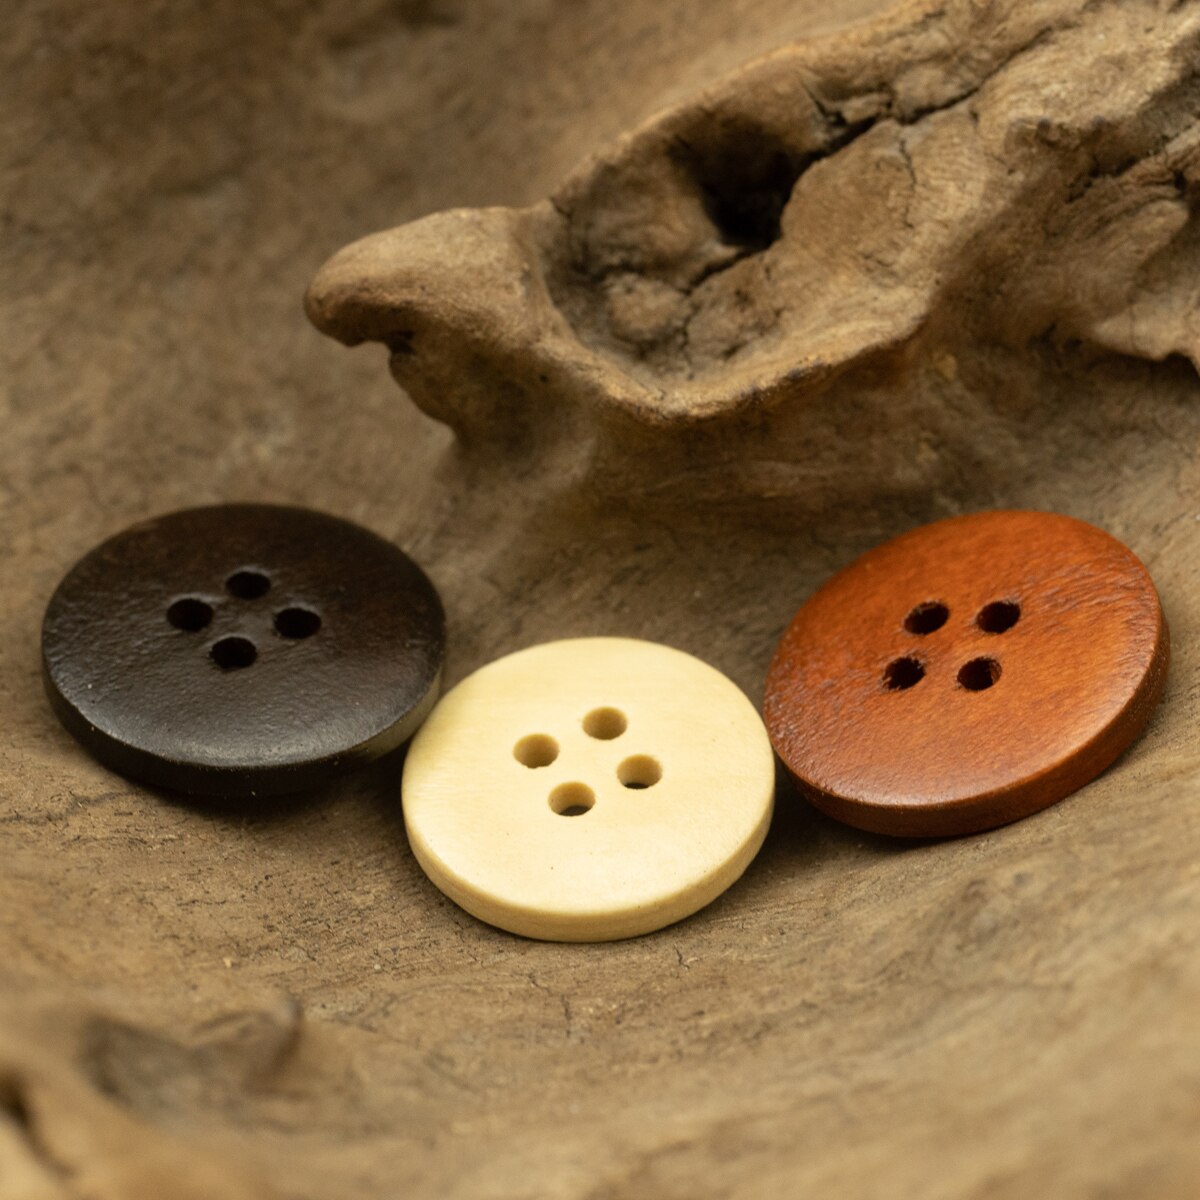 10pcs/lot Wooden Buttons for Crafts and Clothing With Curved Rim Natural Sewing Accessories